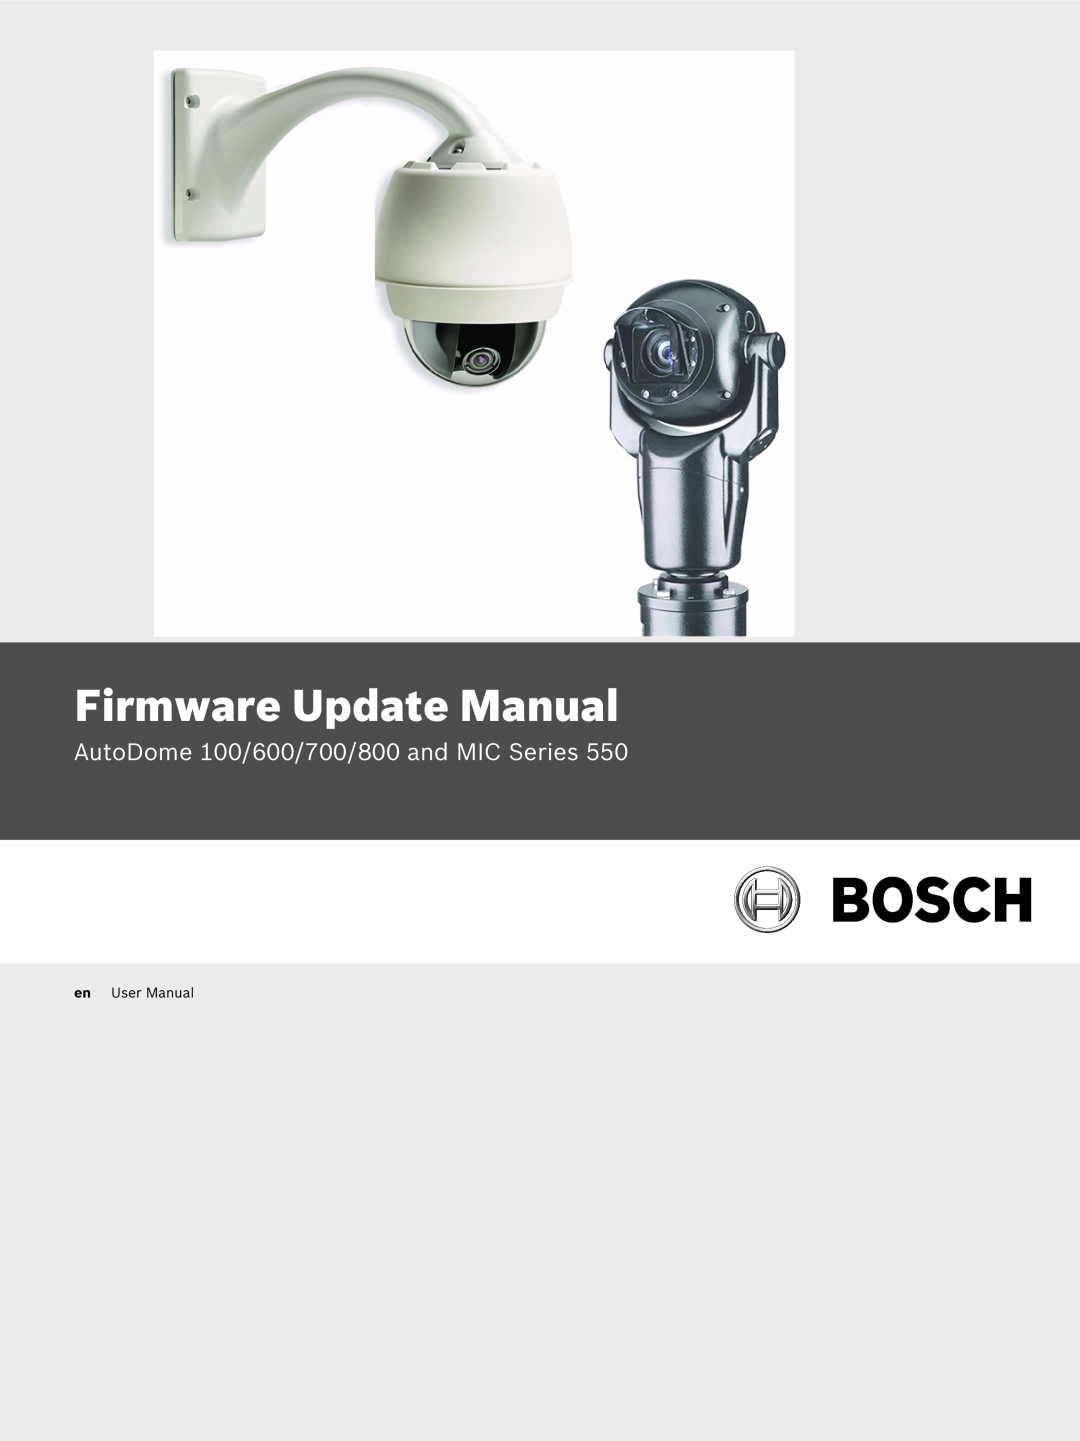 Bosch Appliances manual Analog PTZ Cameras, AutoDome 100/600/700/800 and MIC Series, en Firmware Update Manual 